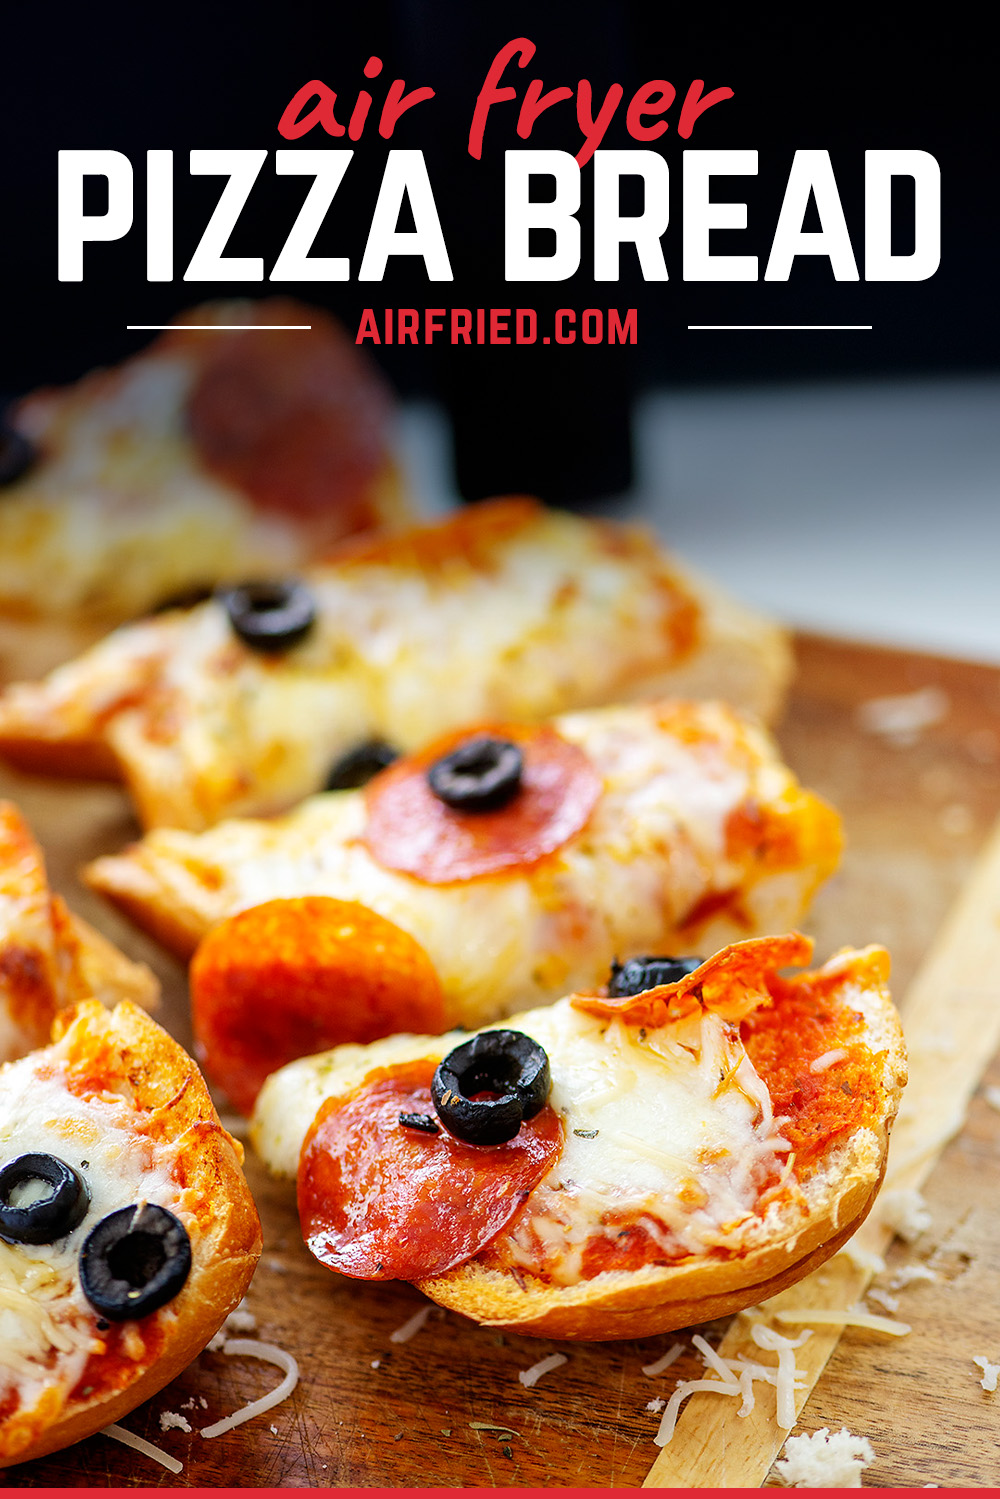 Get creative with your homemade pizza bread by using your air fryer with your favorite pizza toppings!